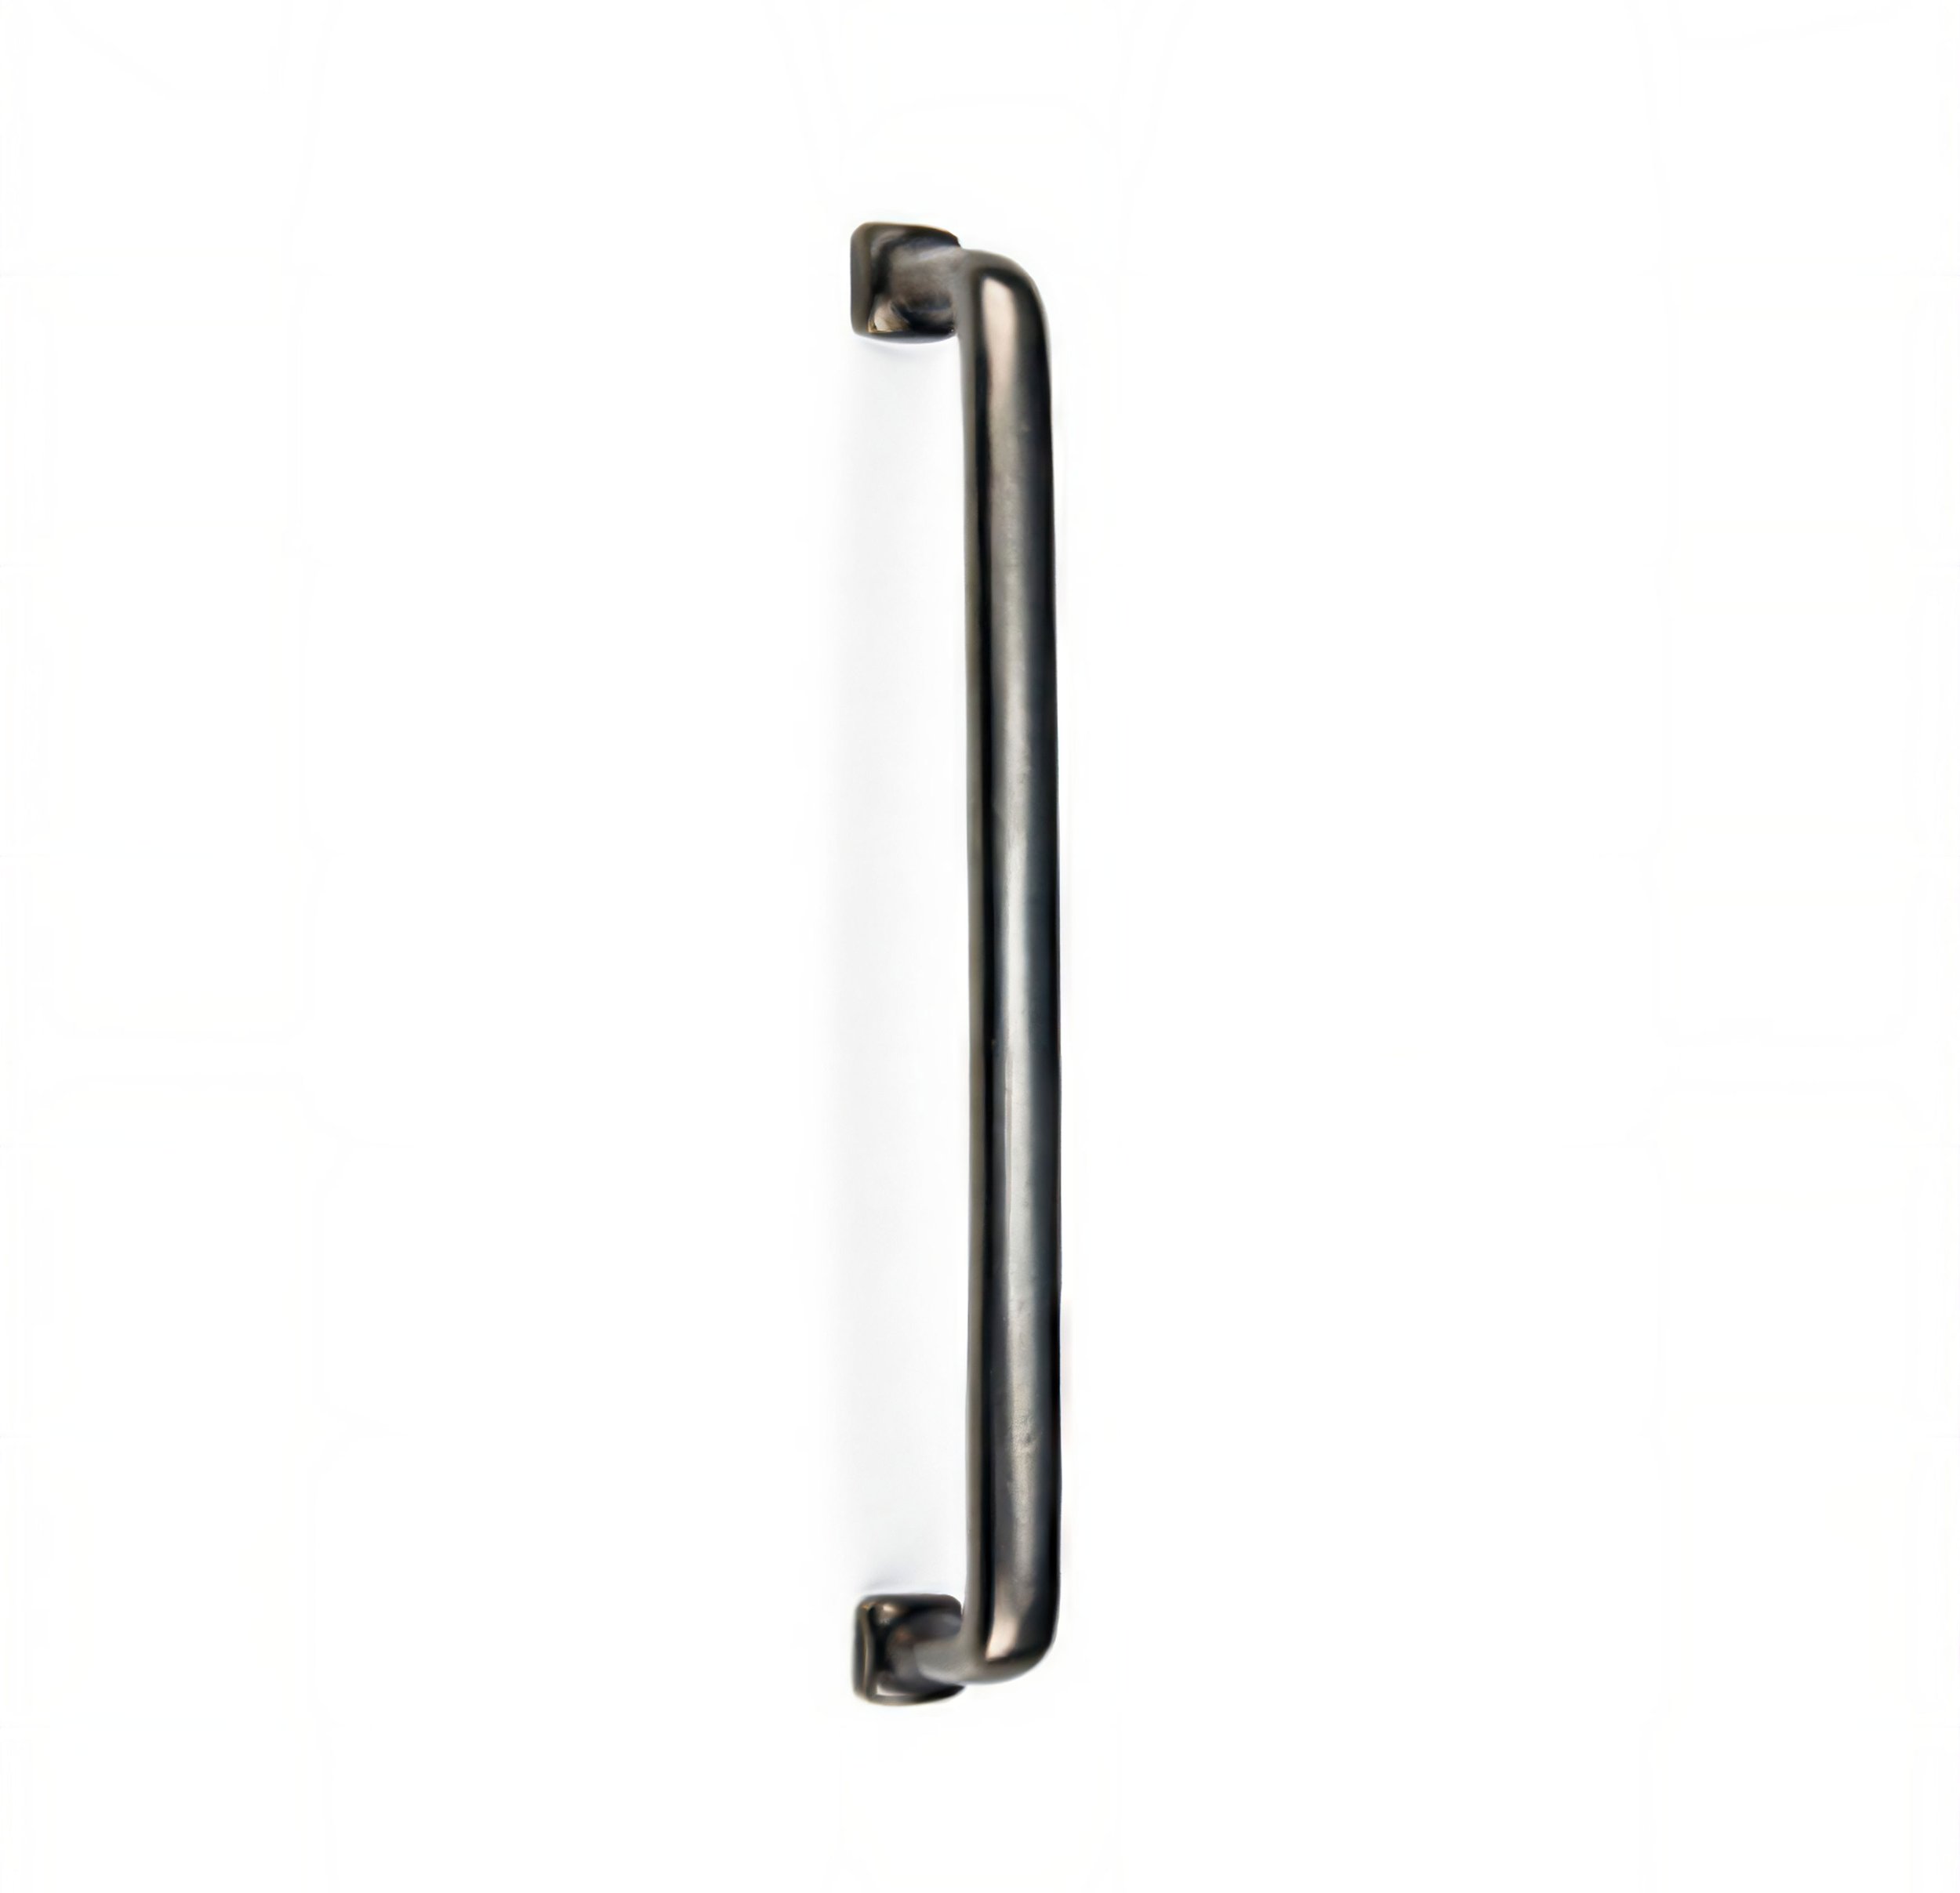 CK-516 Square Foot Cabinet Pull